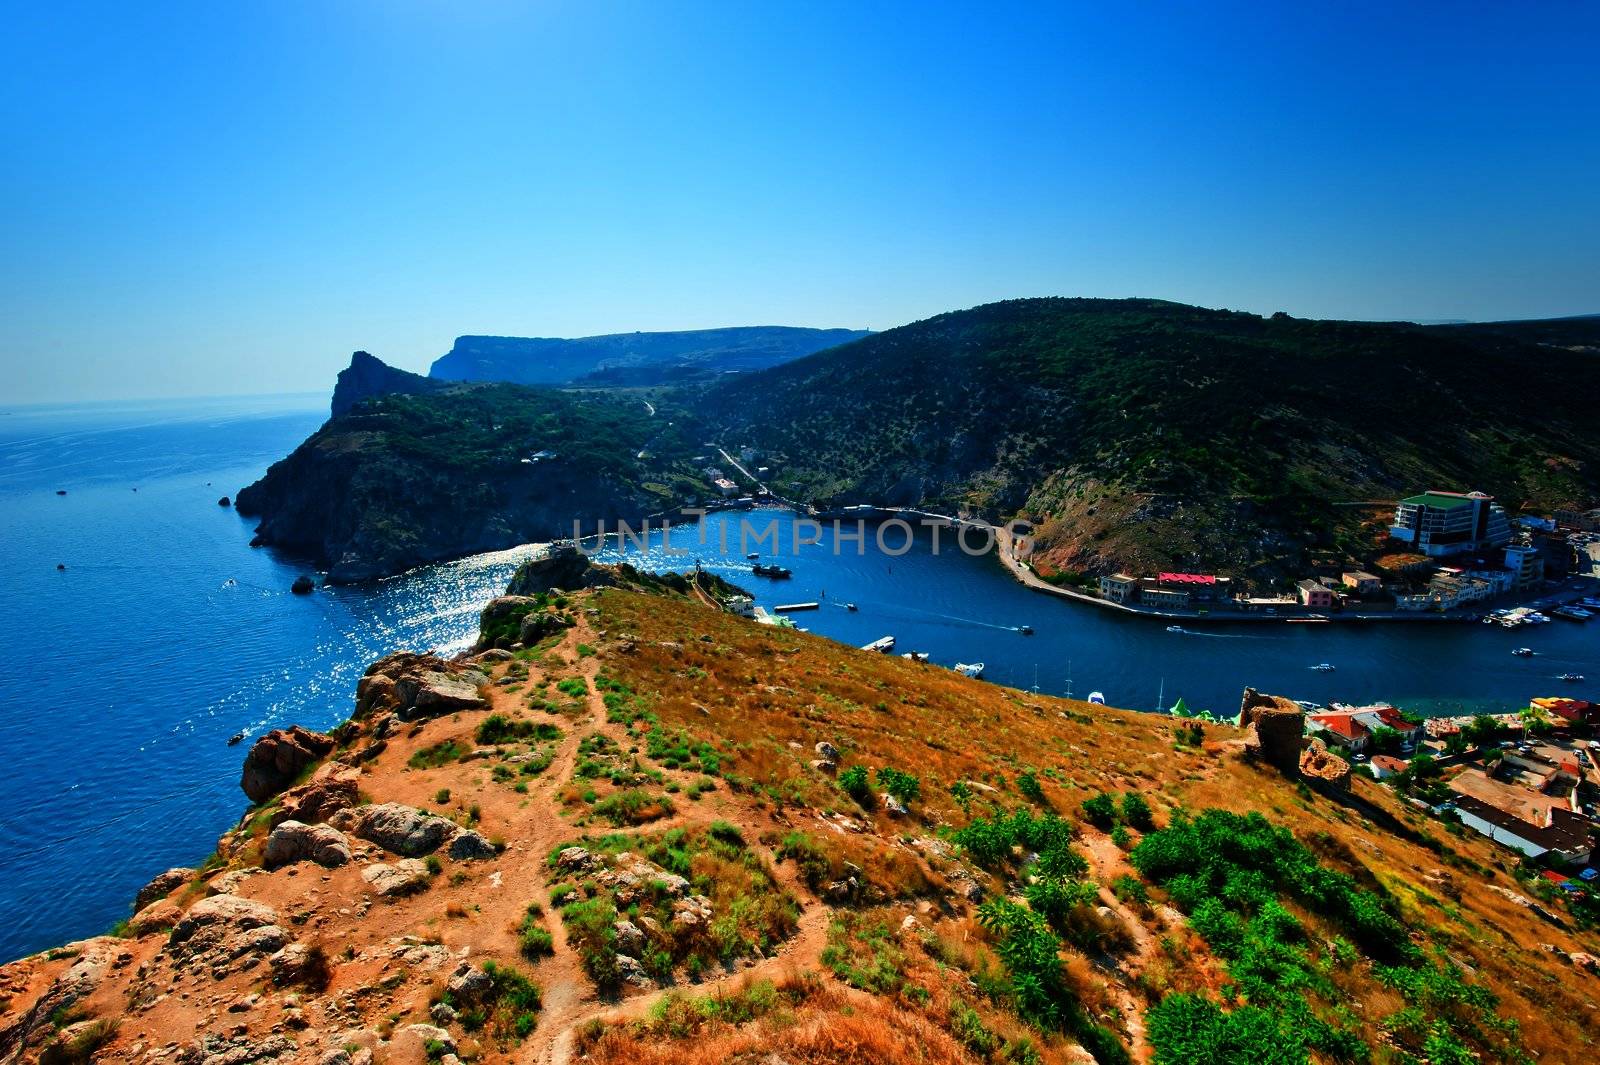 View of the entrance to the picturesque bay of Balaklava and the remains of the fortress Cembalo by kosmsos111